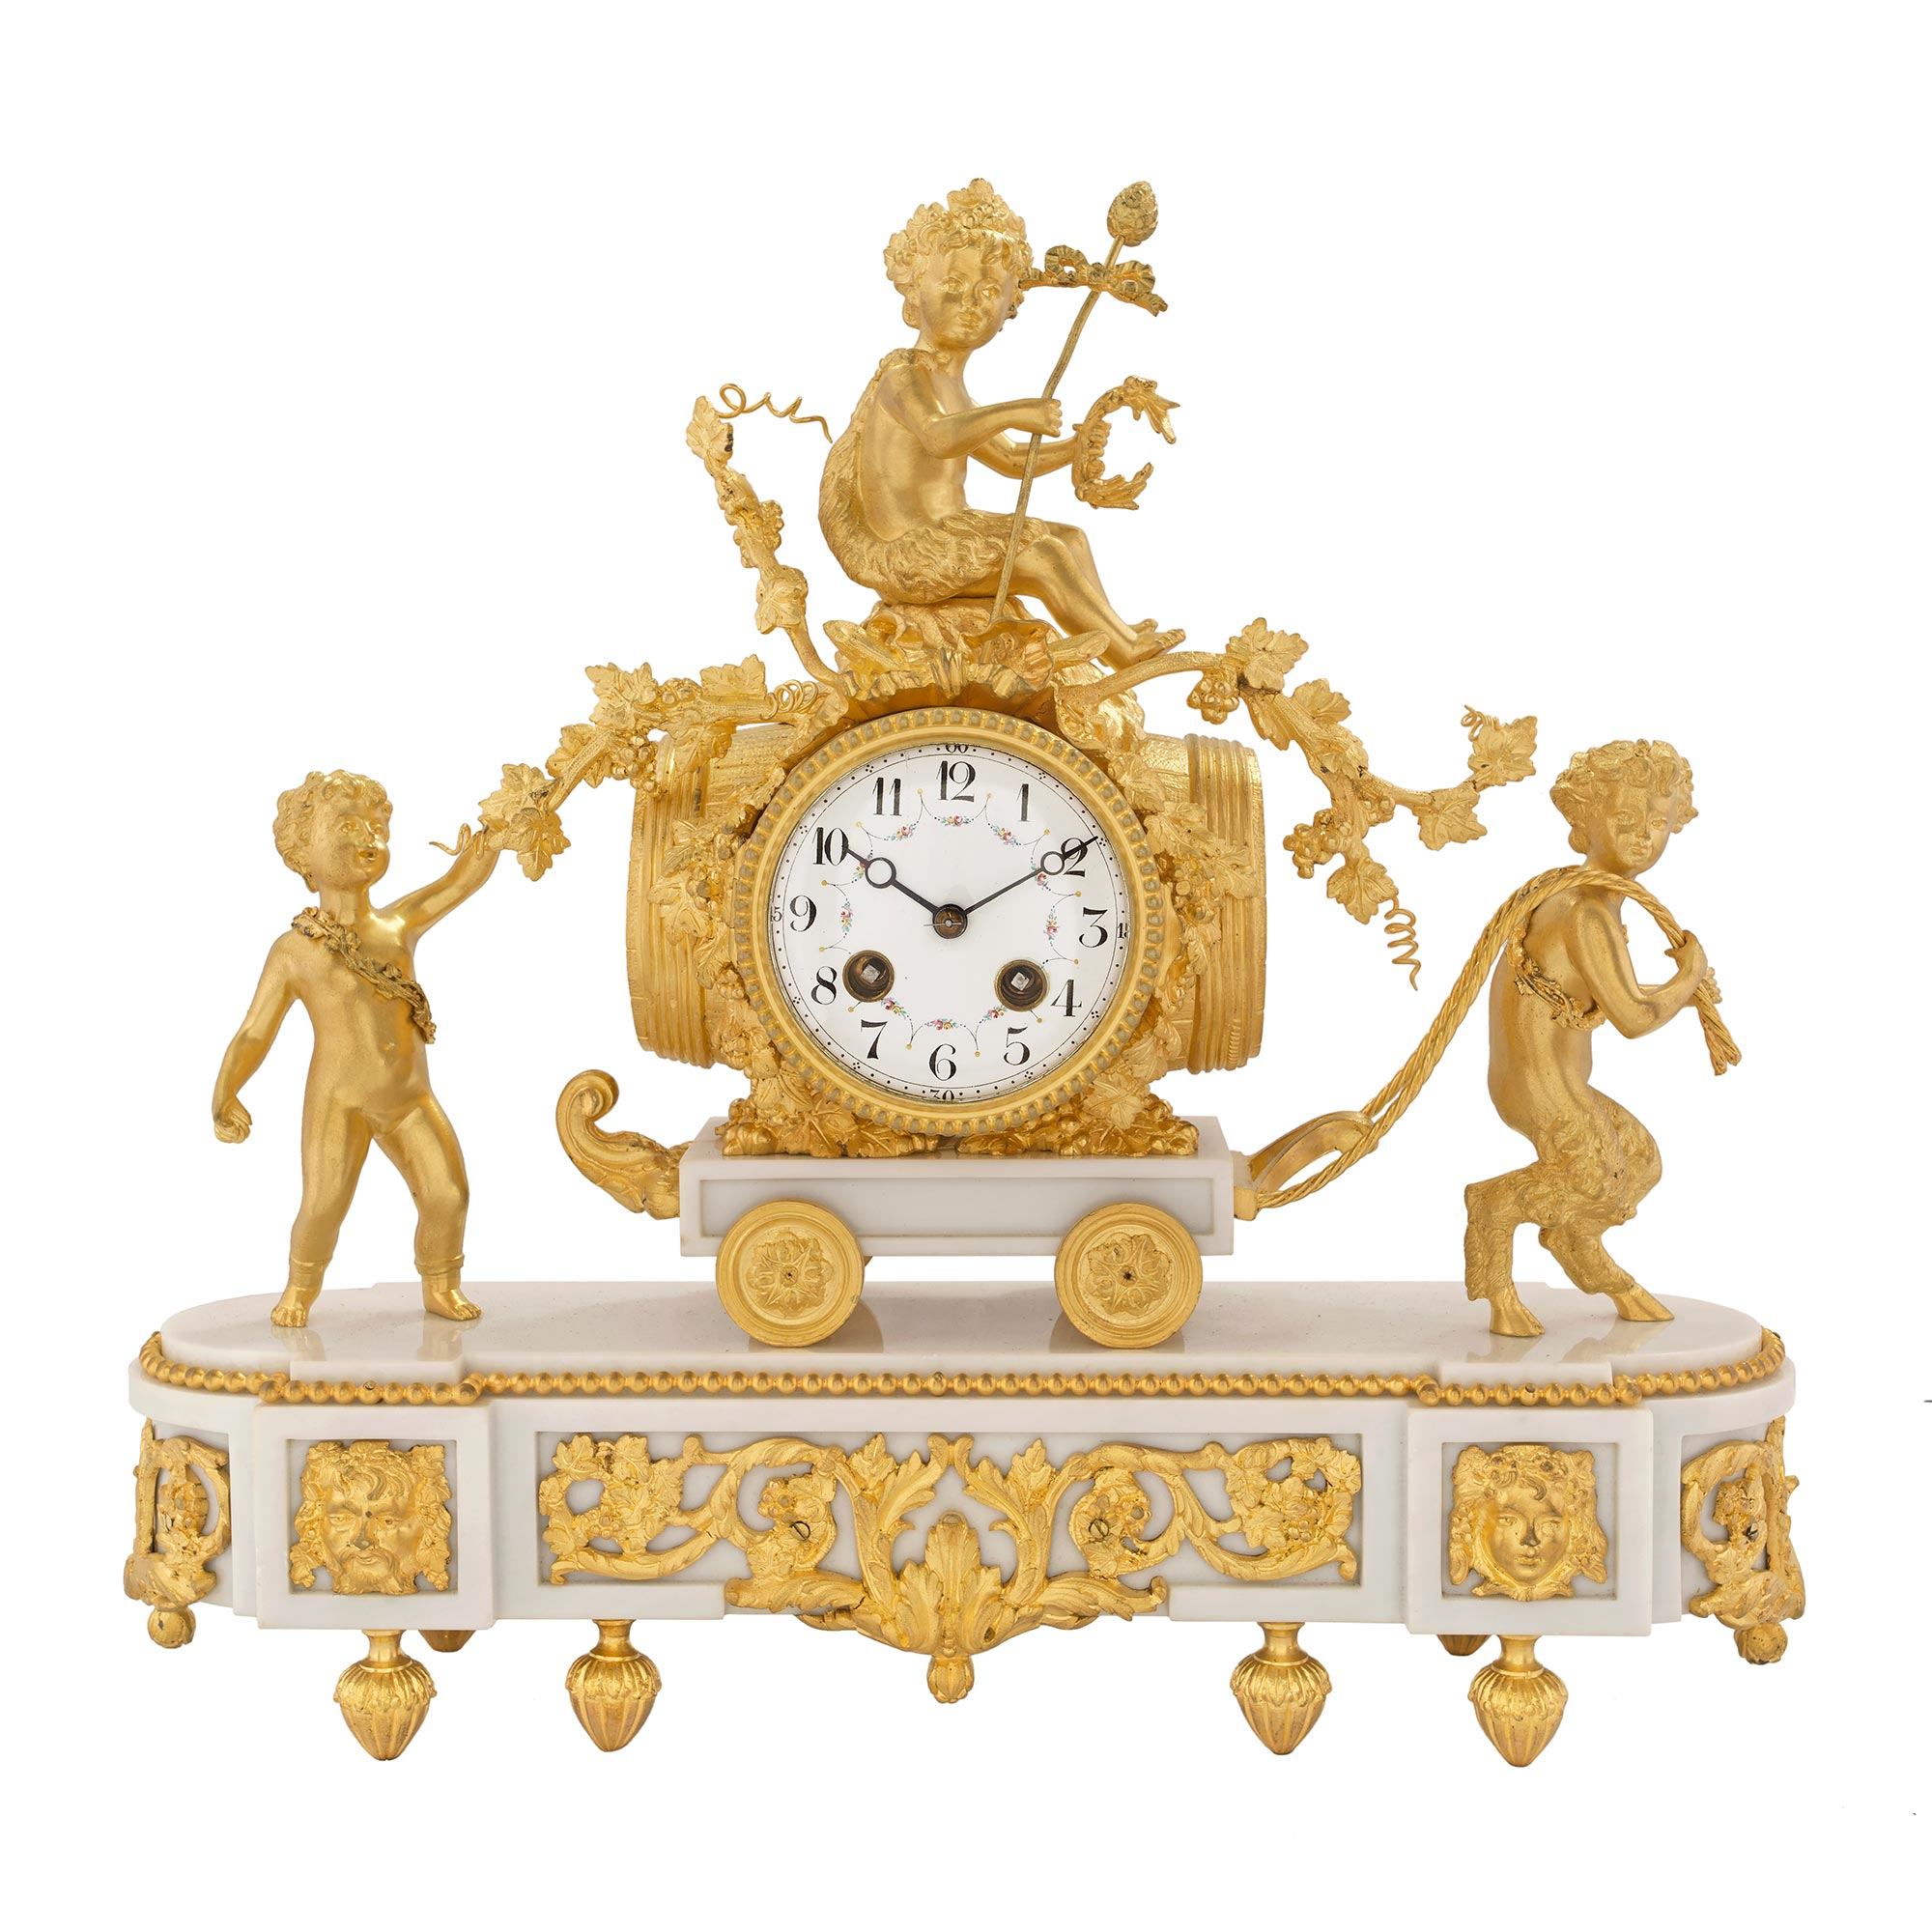 A French 19th Century Louis Xvi St White Carrara Marble And Ormolu Clock Cedric Dupont Antiques Download hd clock photos for free on unsplash. a french 19th century louis xvi st white carrara marble and ormolu clock